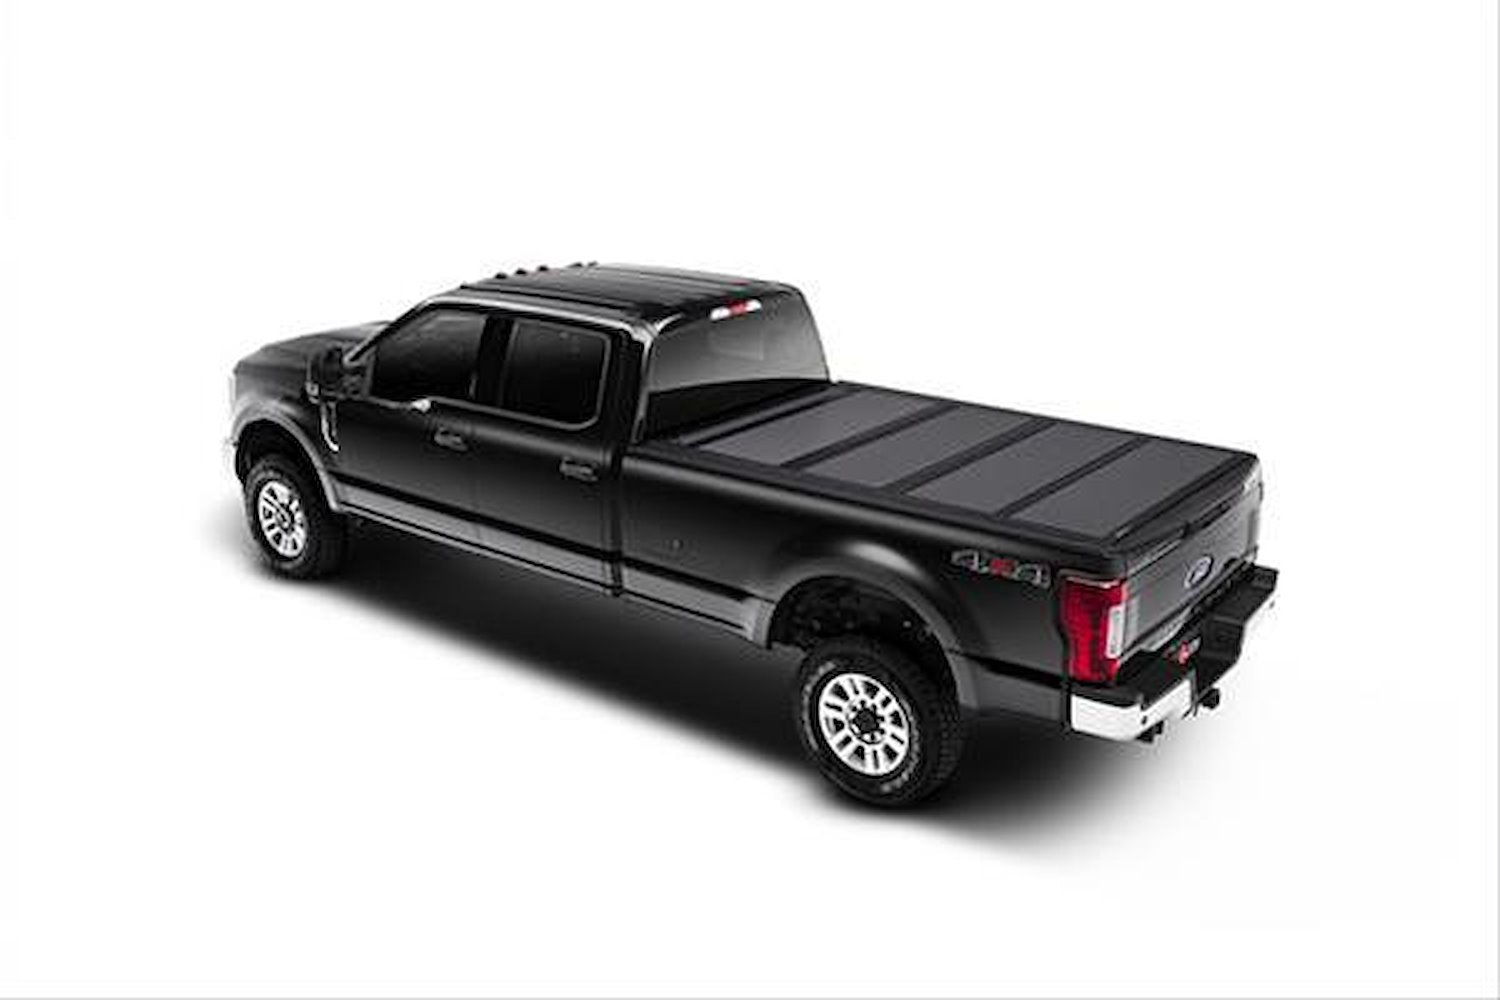 448330 BAKFlip MX4 for Fits Select Ford Super-Duty 6.10 ft. Bed, Hard Folding Cover Style [Black Finish]